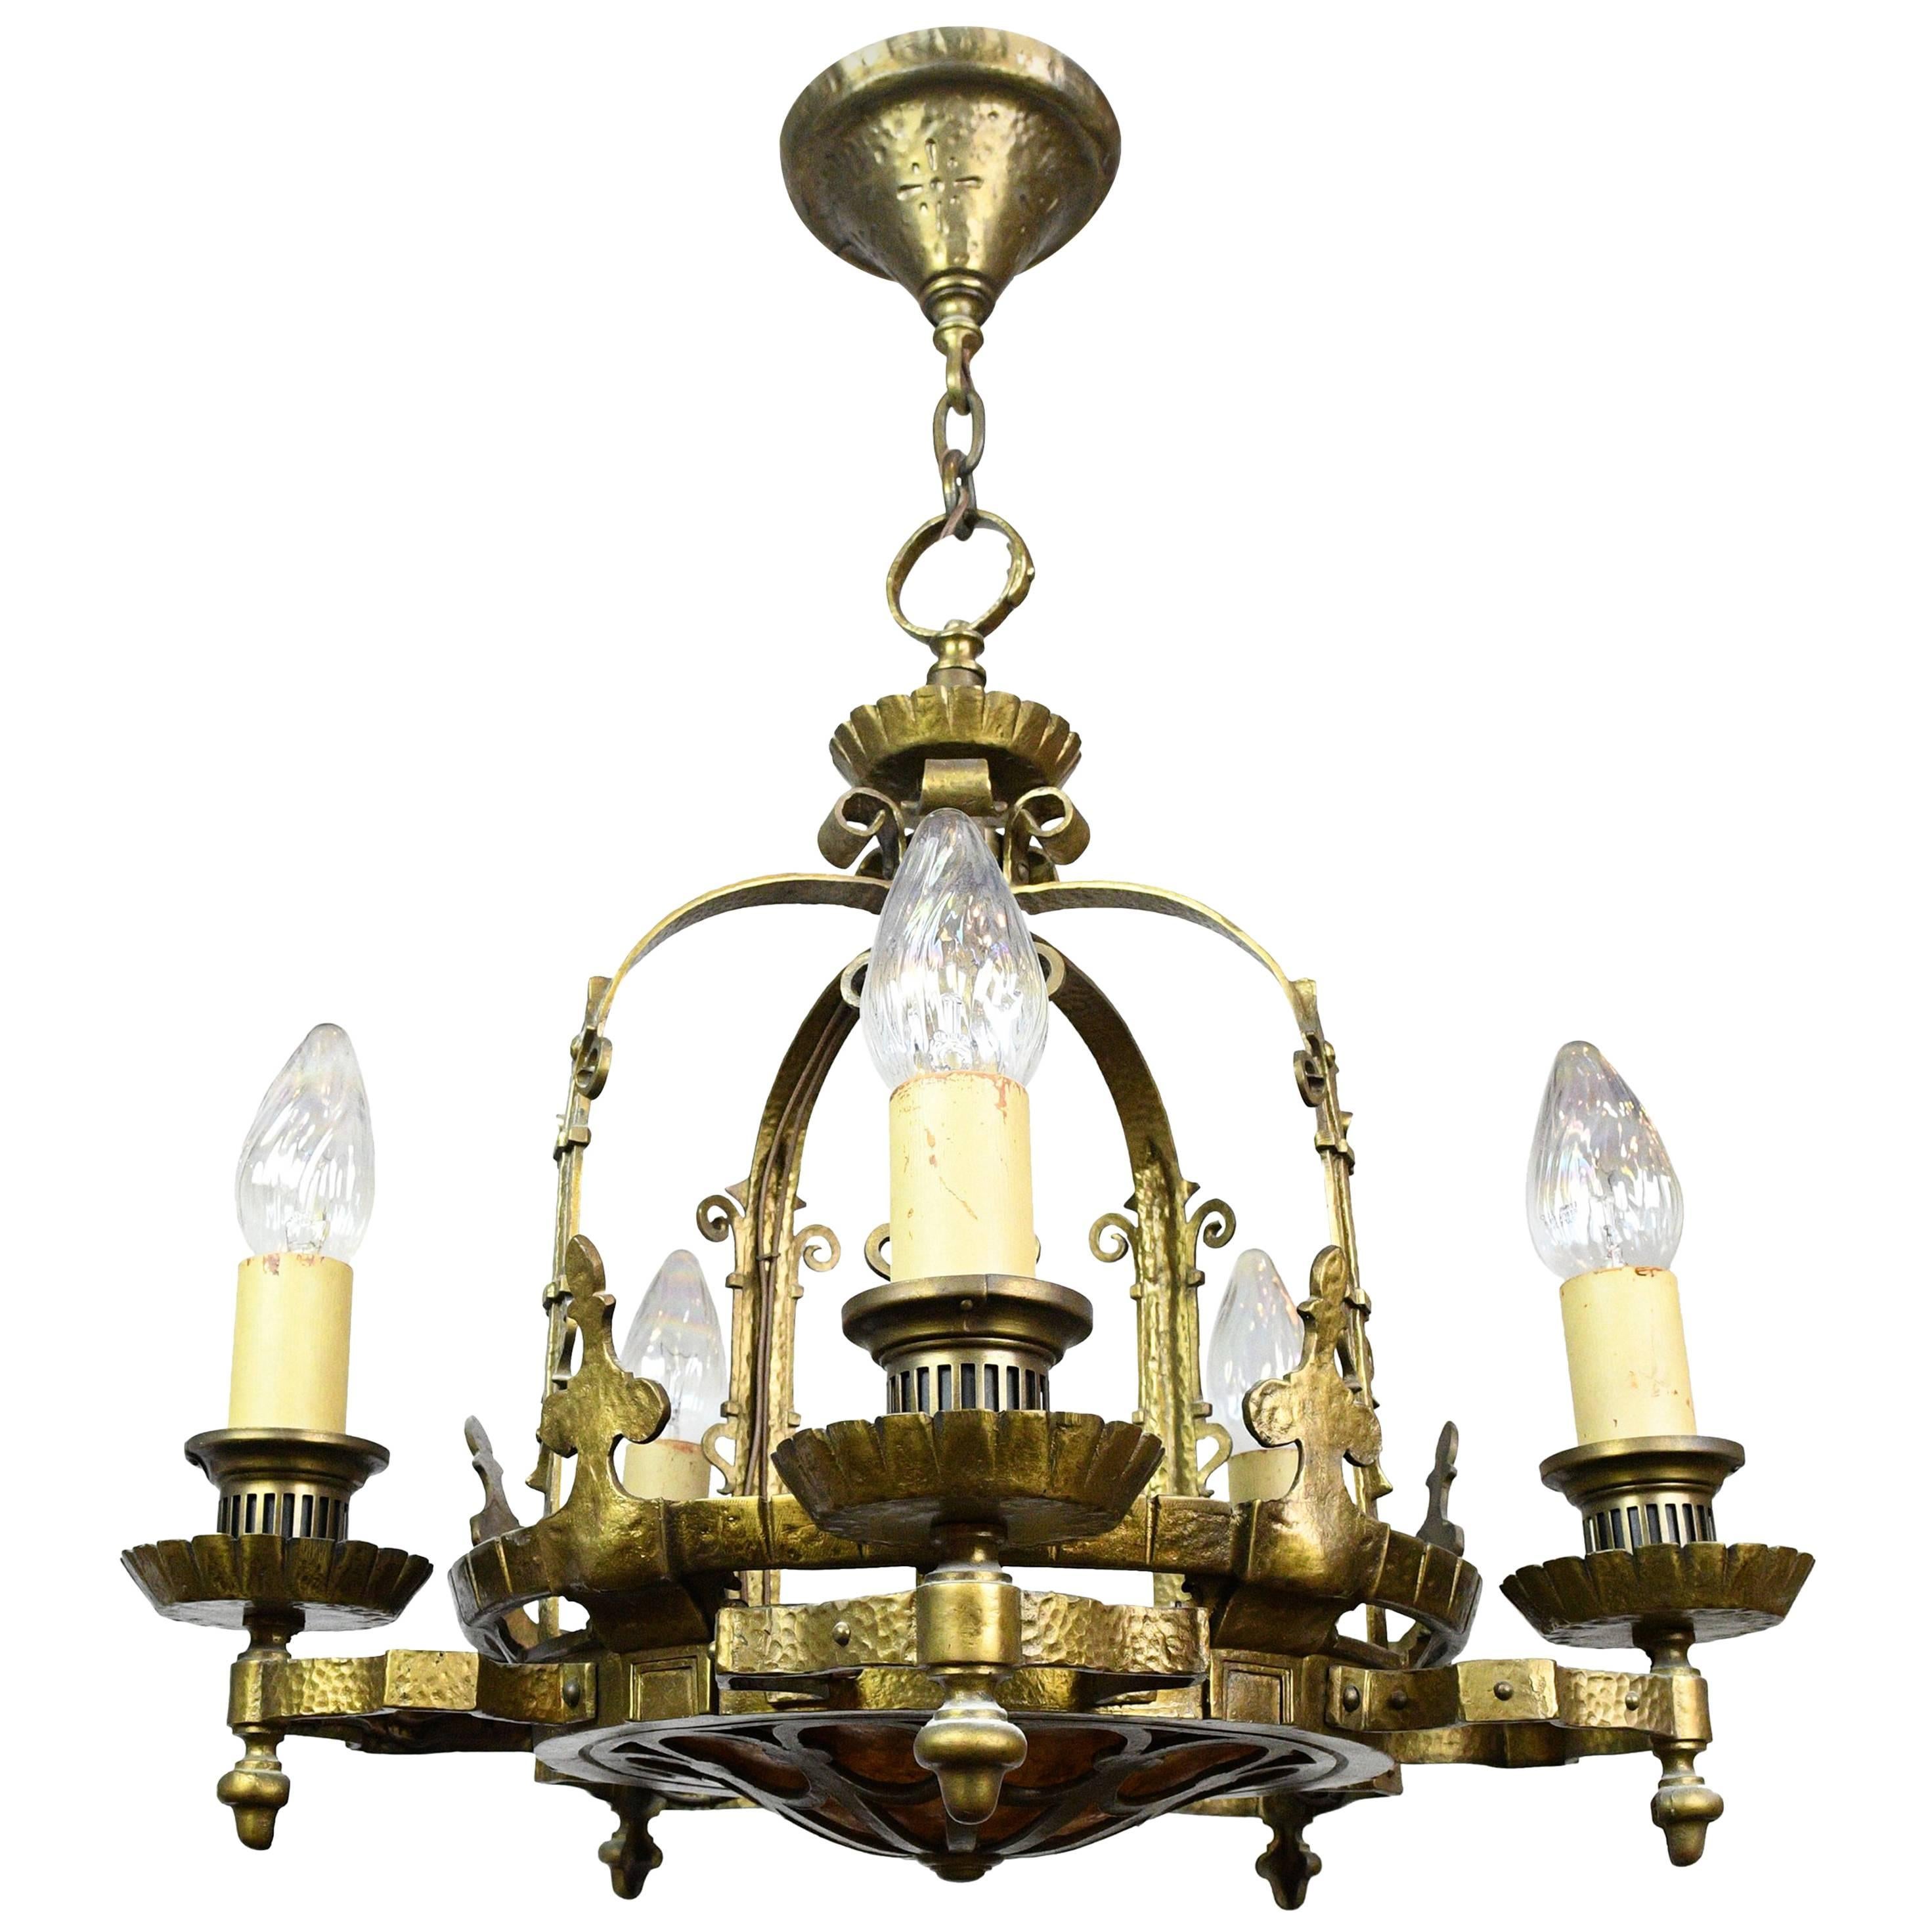 Gothic Revival Five Candle Chandelier with Mica Bowl For Sale